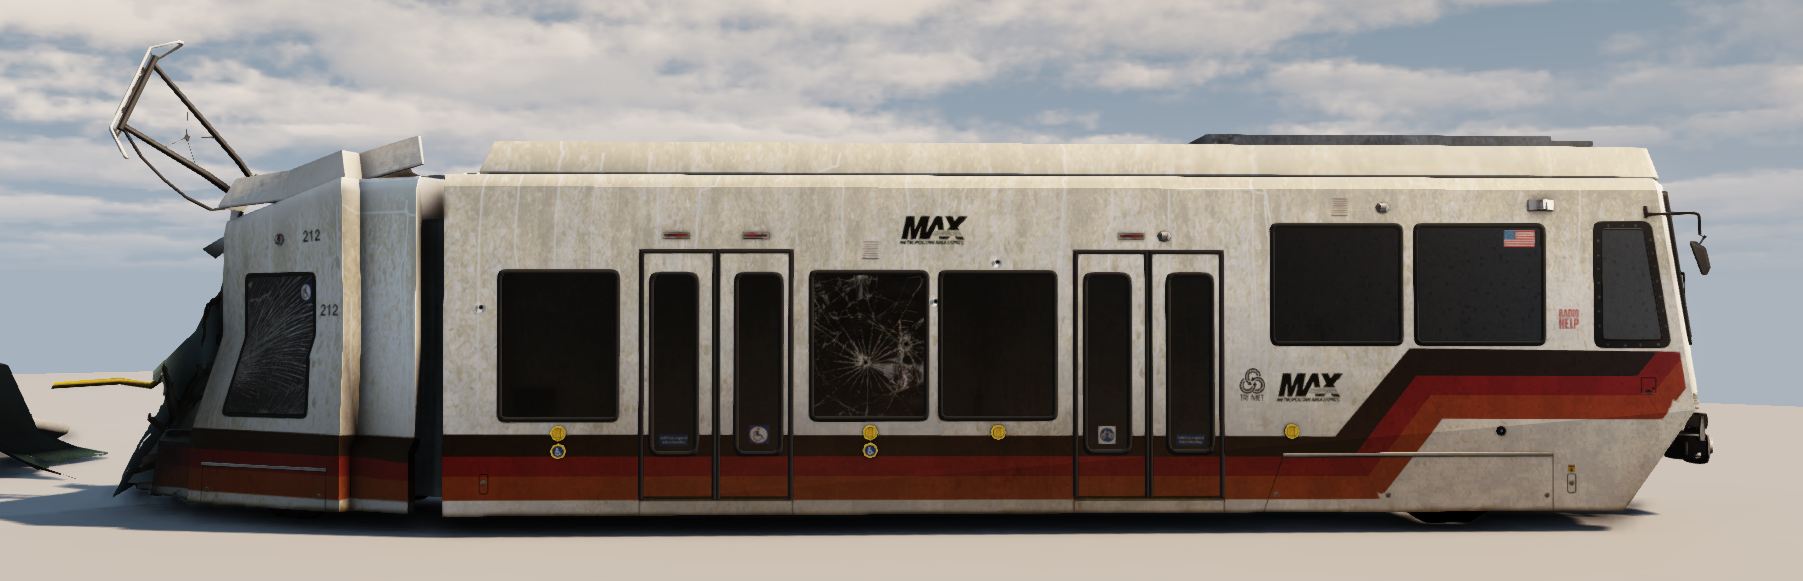 Destroyed Max Train